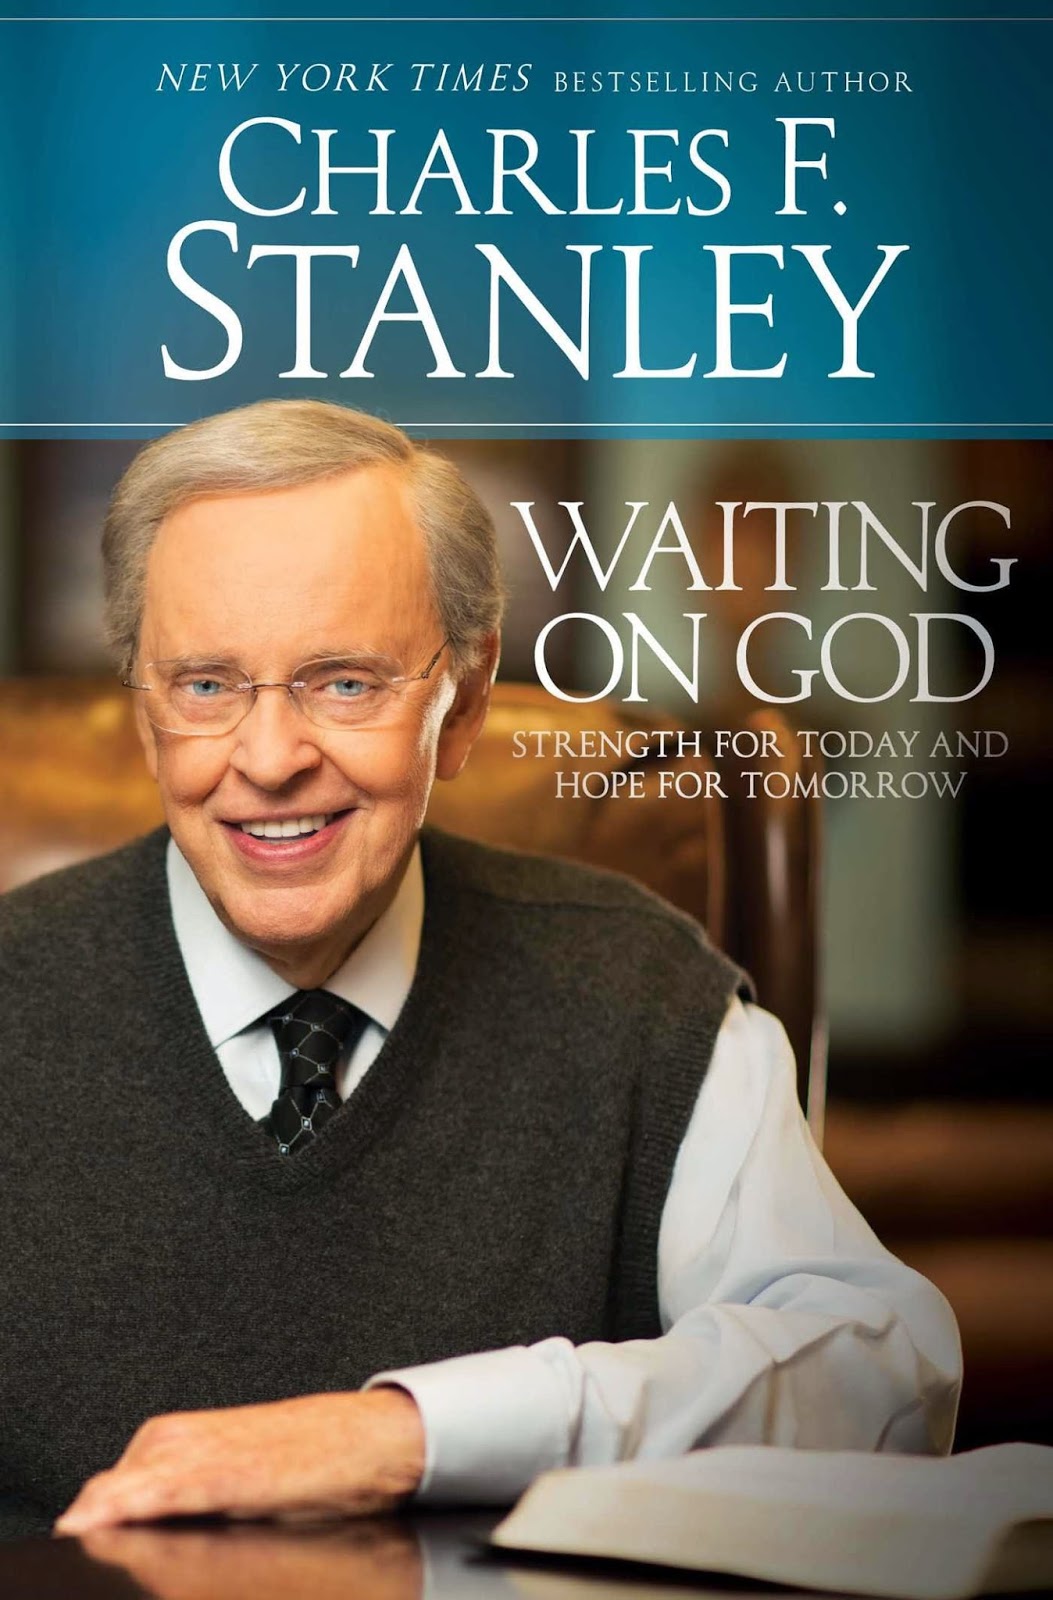 Waiting On God by Charles Stanley